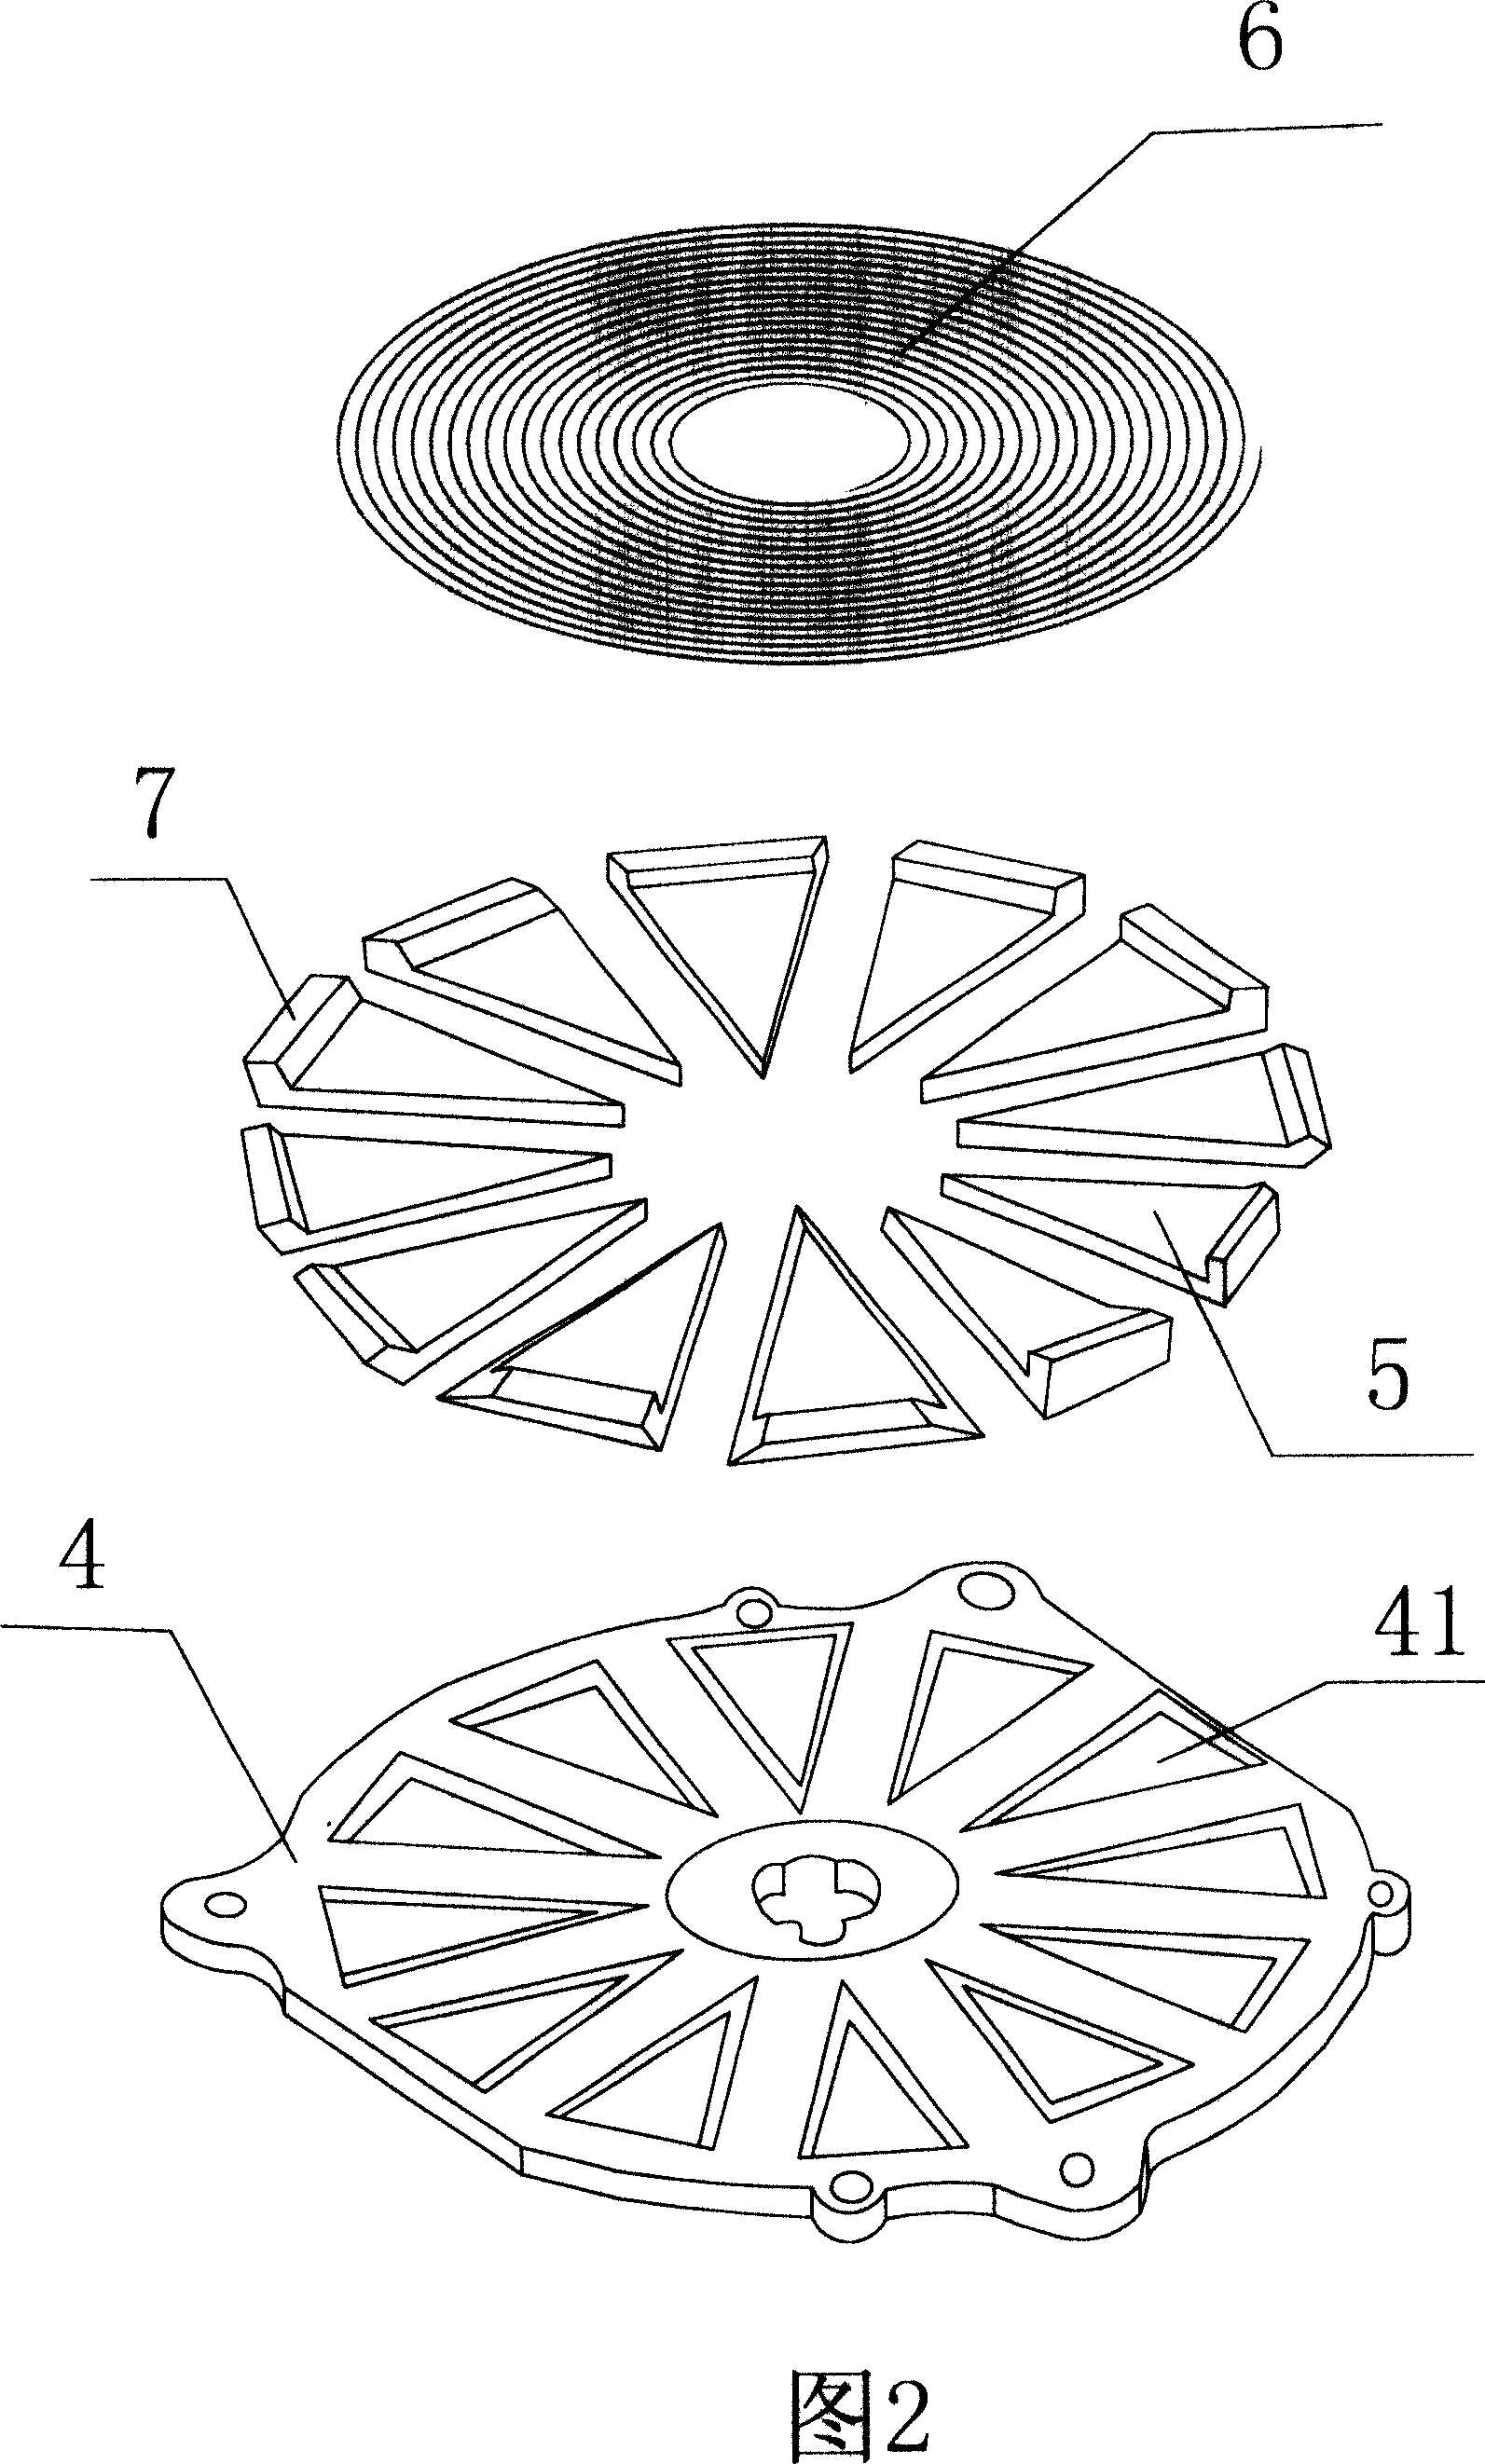 A winding tray for the electromagnetic heating device